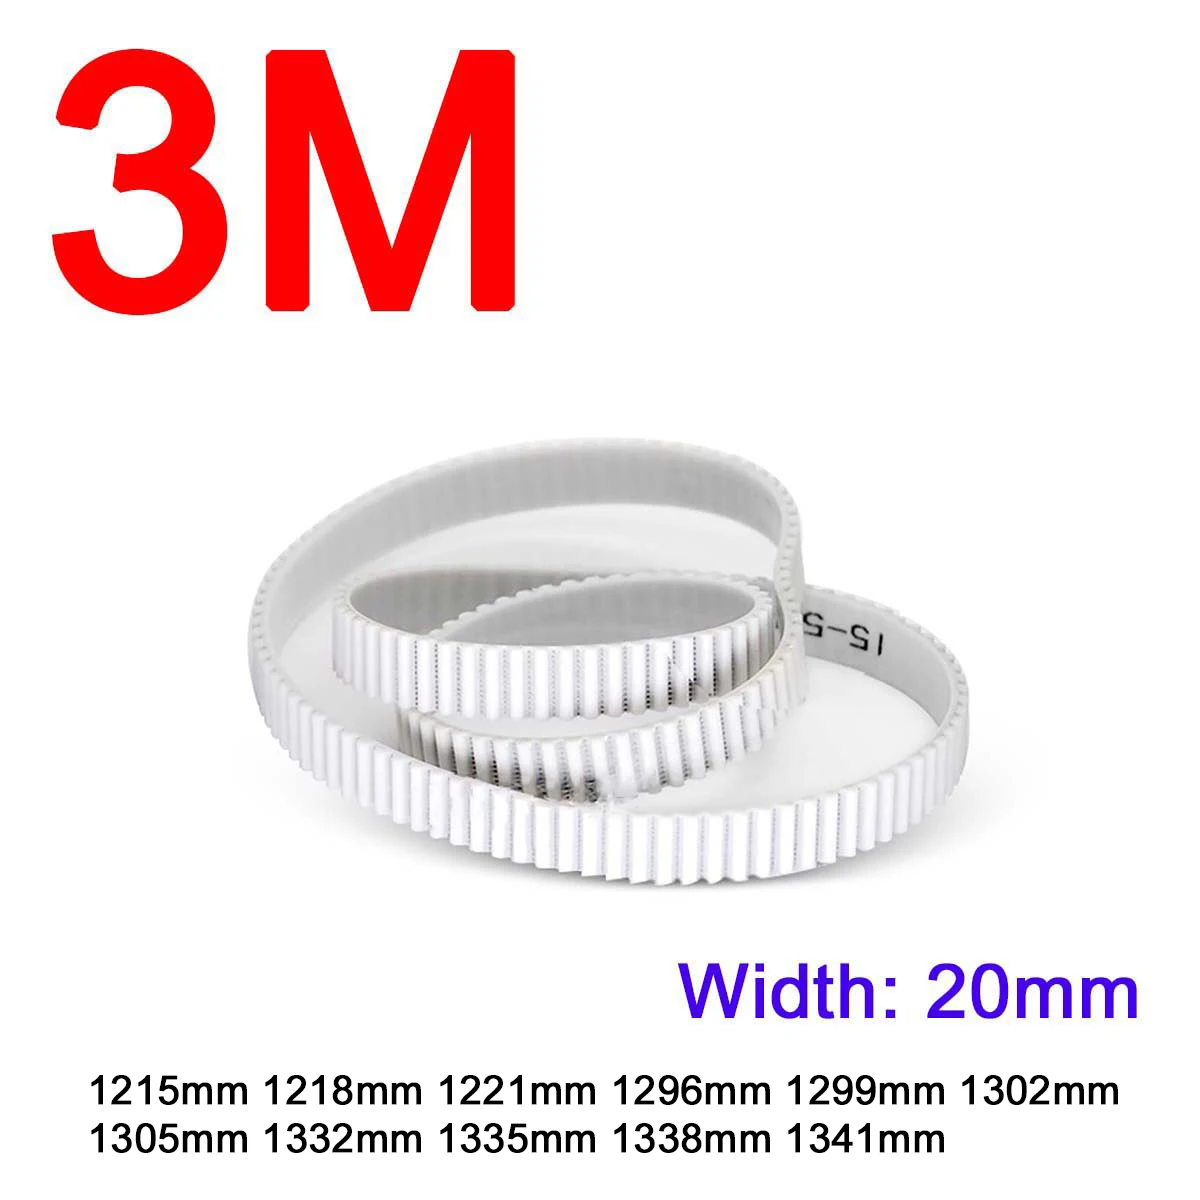 

1Pc Width 20mm 3M White Polyurethane PU Tooth Timing Belt Pitch Length 1215 1218 1221 1296 1299 1302 1305 1332 1335 1338 1341mm